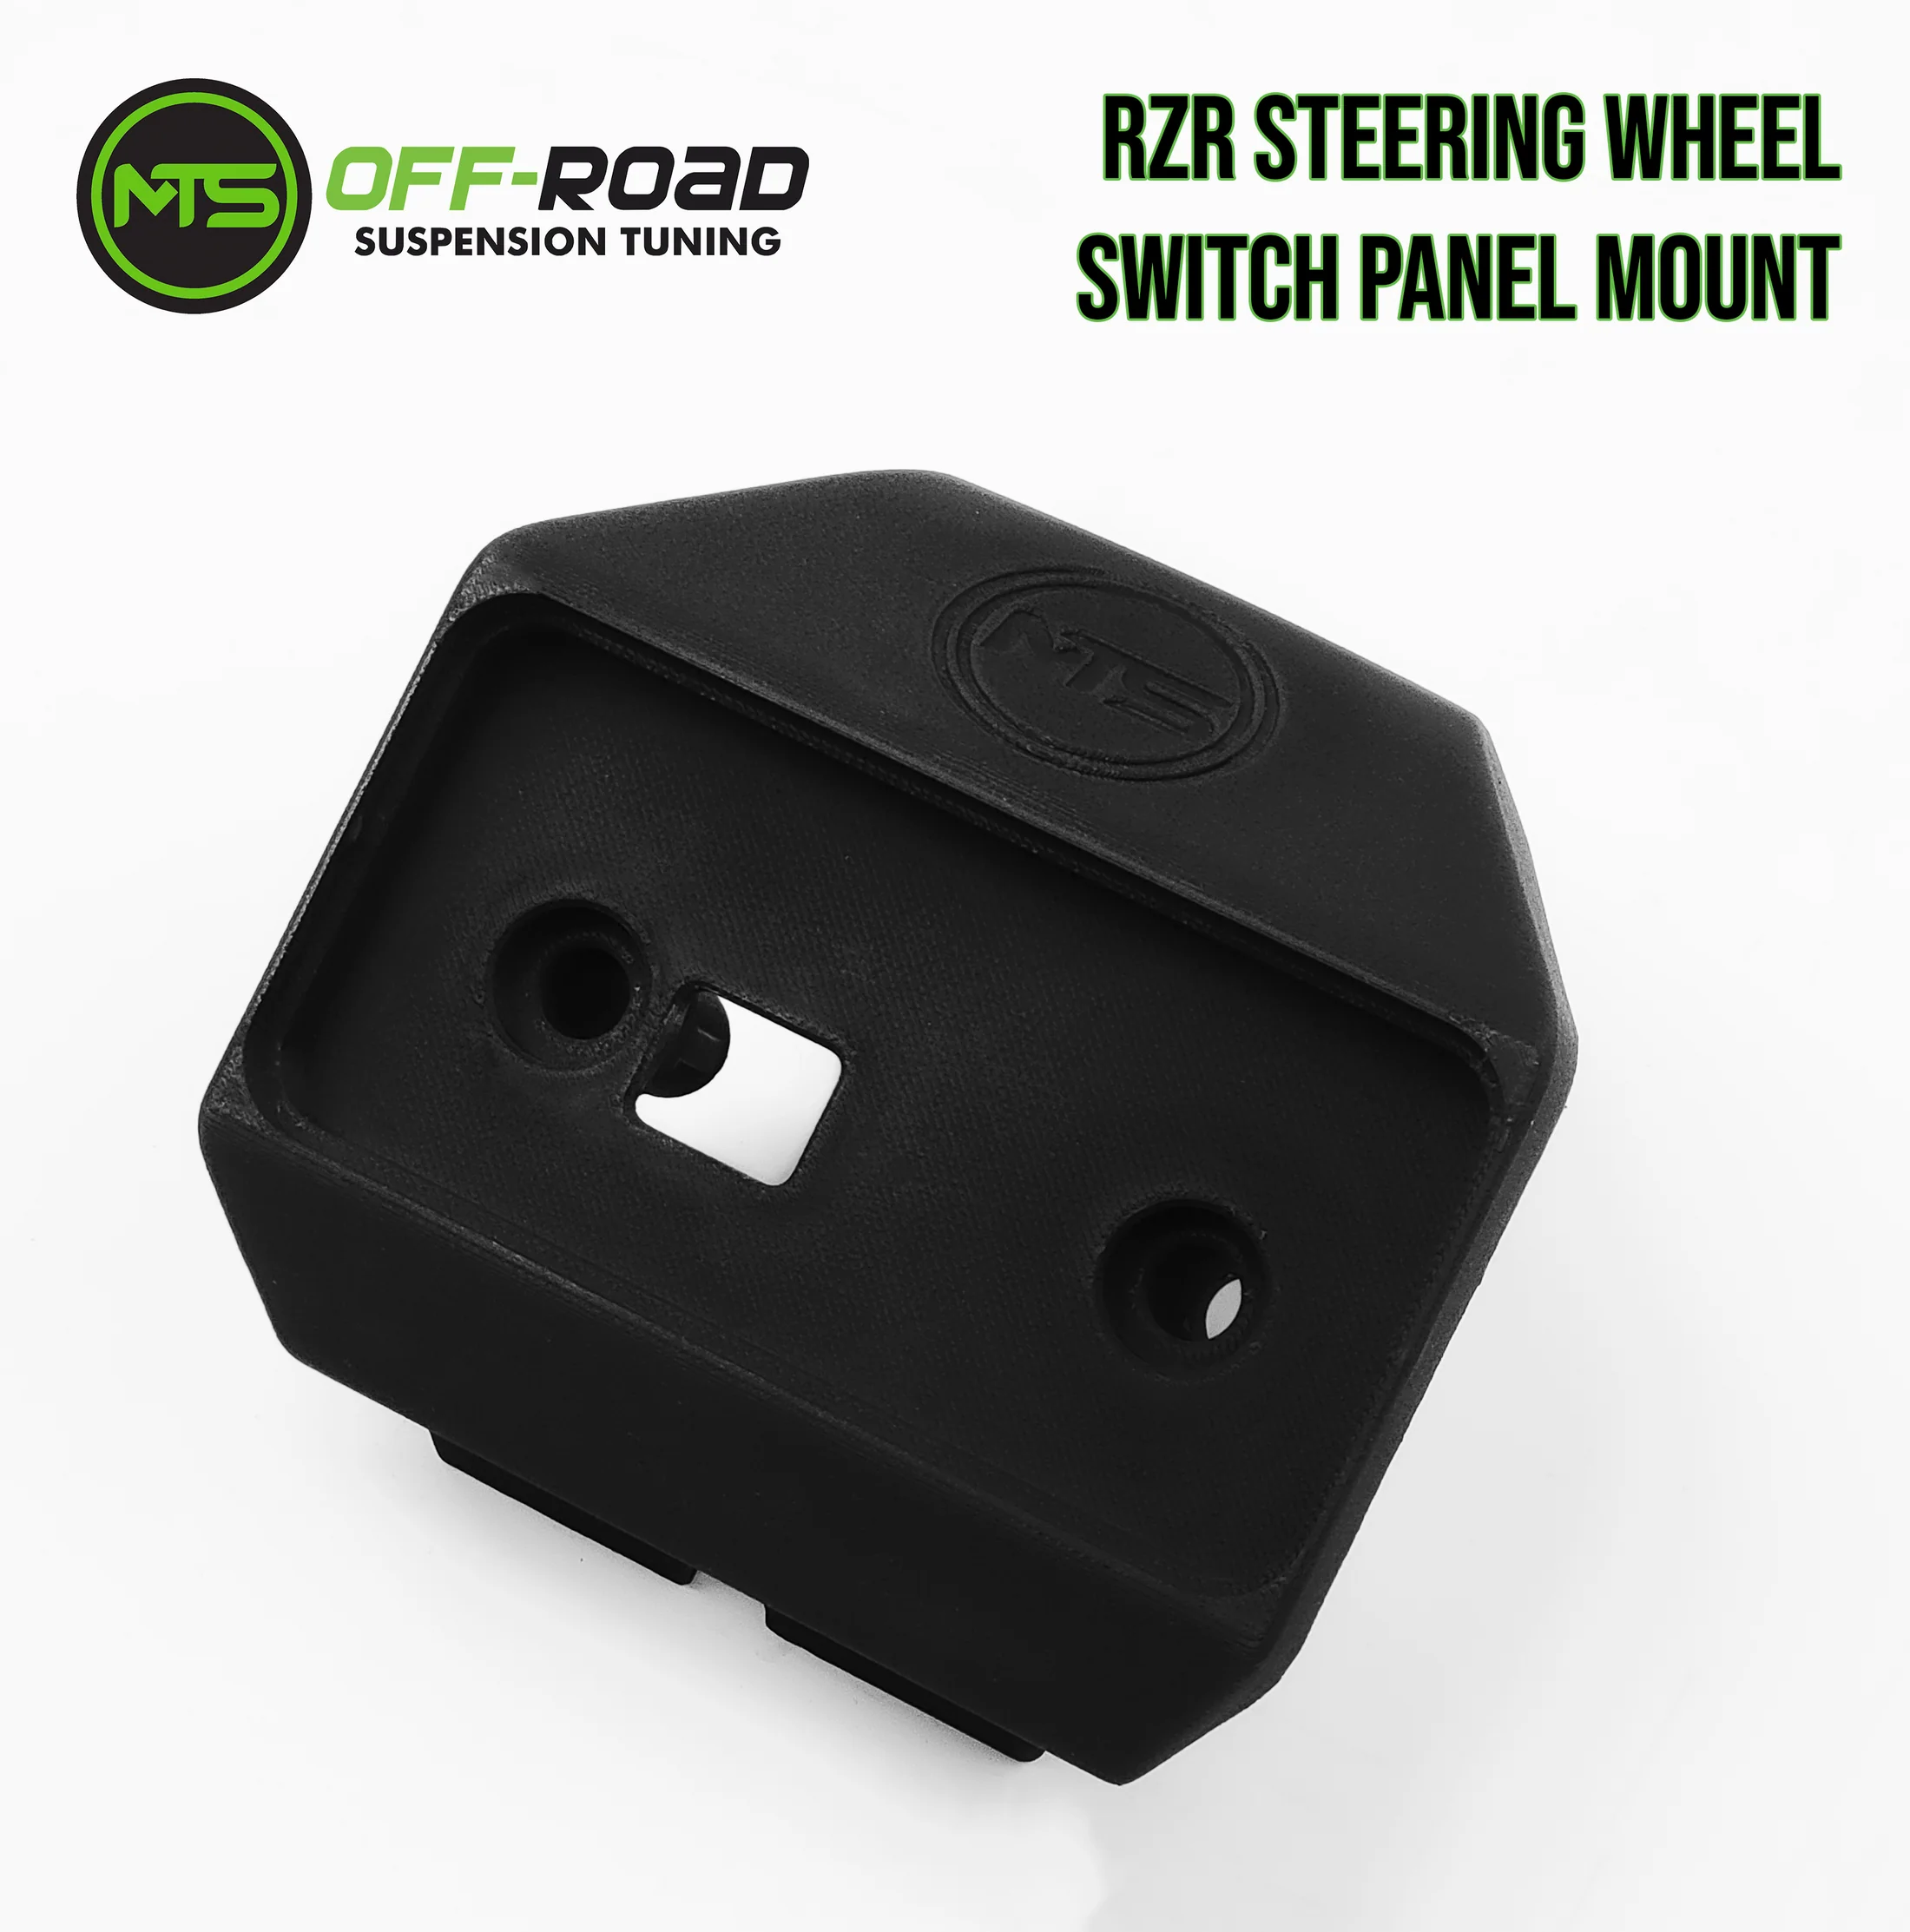 mts off road suspension tuning switch pro steering wheel mount for rzr.png